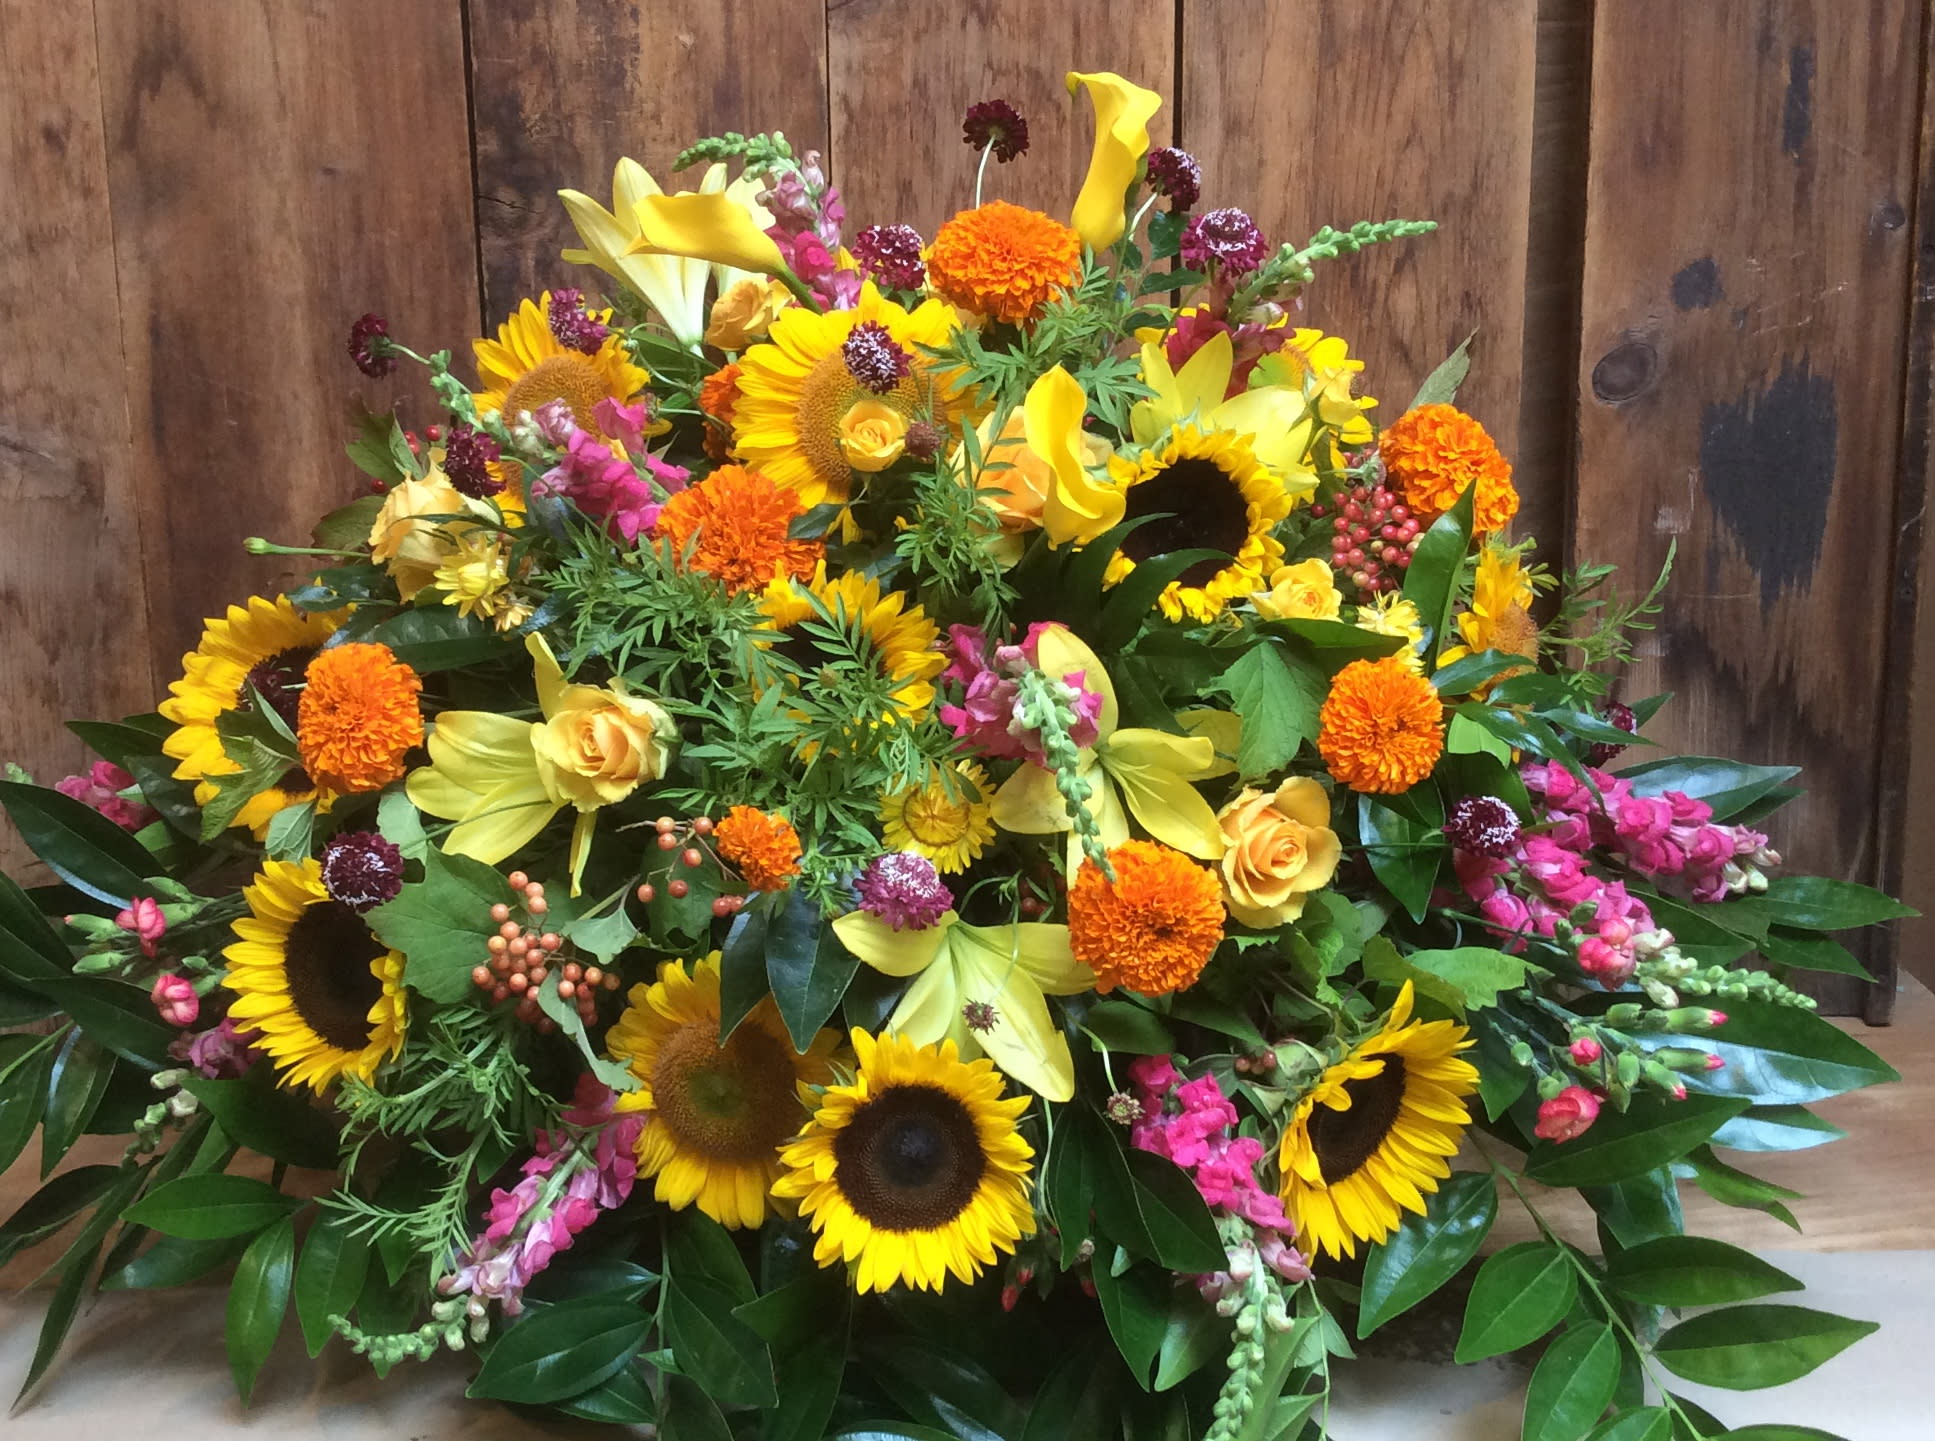 Yellow, Orange &amp; Pink  Casket Blanket - - Send an elegant expression of your love and a touching tribute to a loved one with this bright casket blanket. An assortment of seasonal vibrant flowers  are arranged with lush greenery to make the perfect tribute for your loved one.